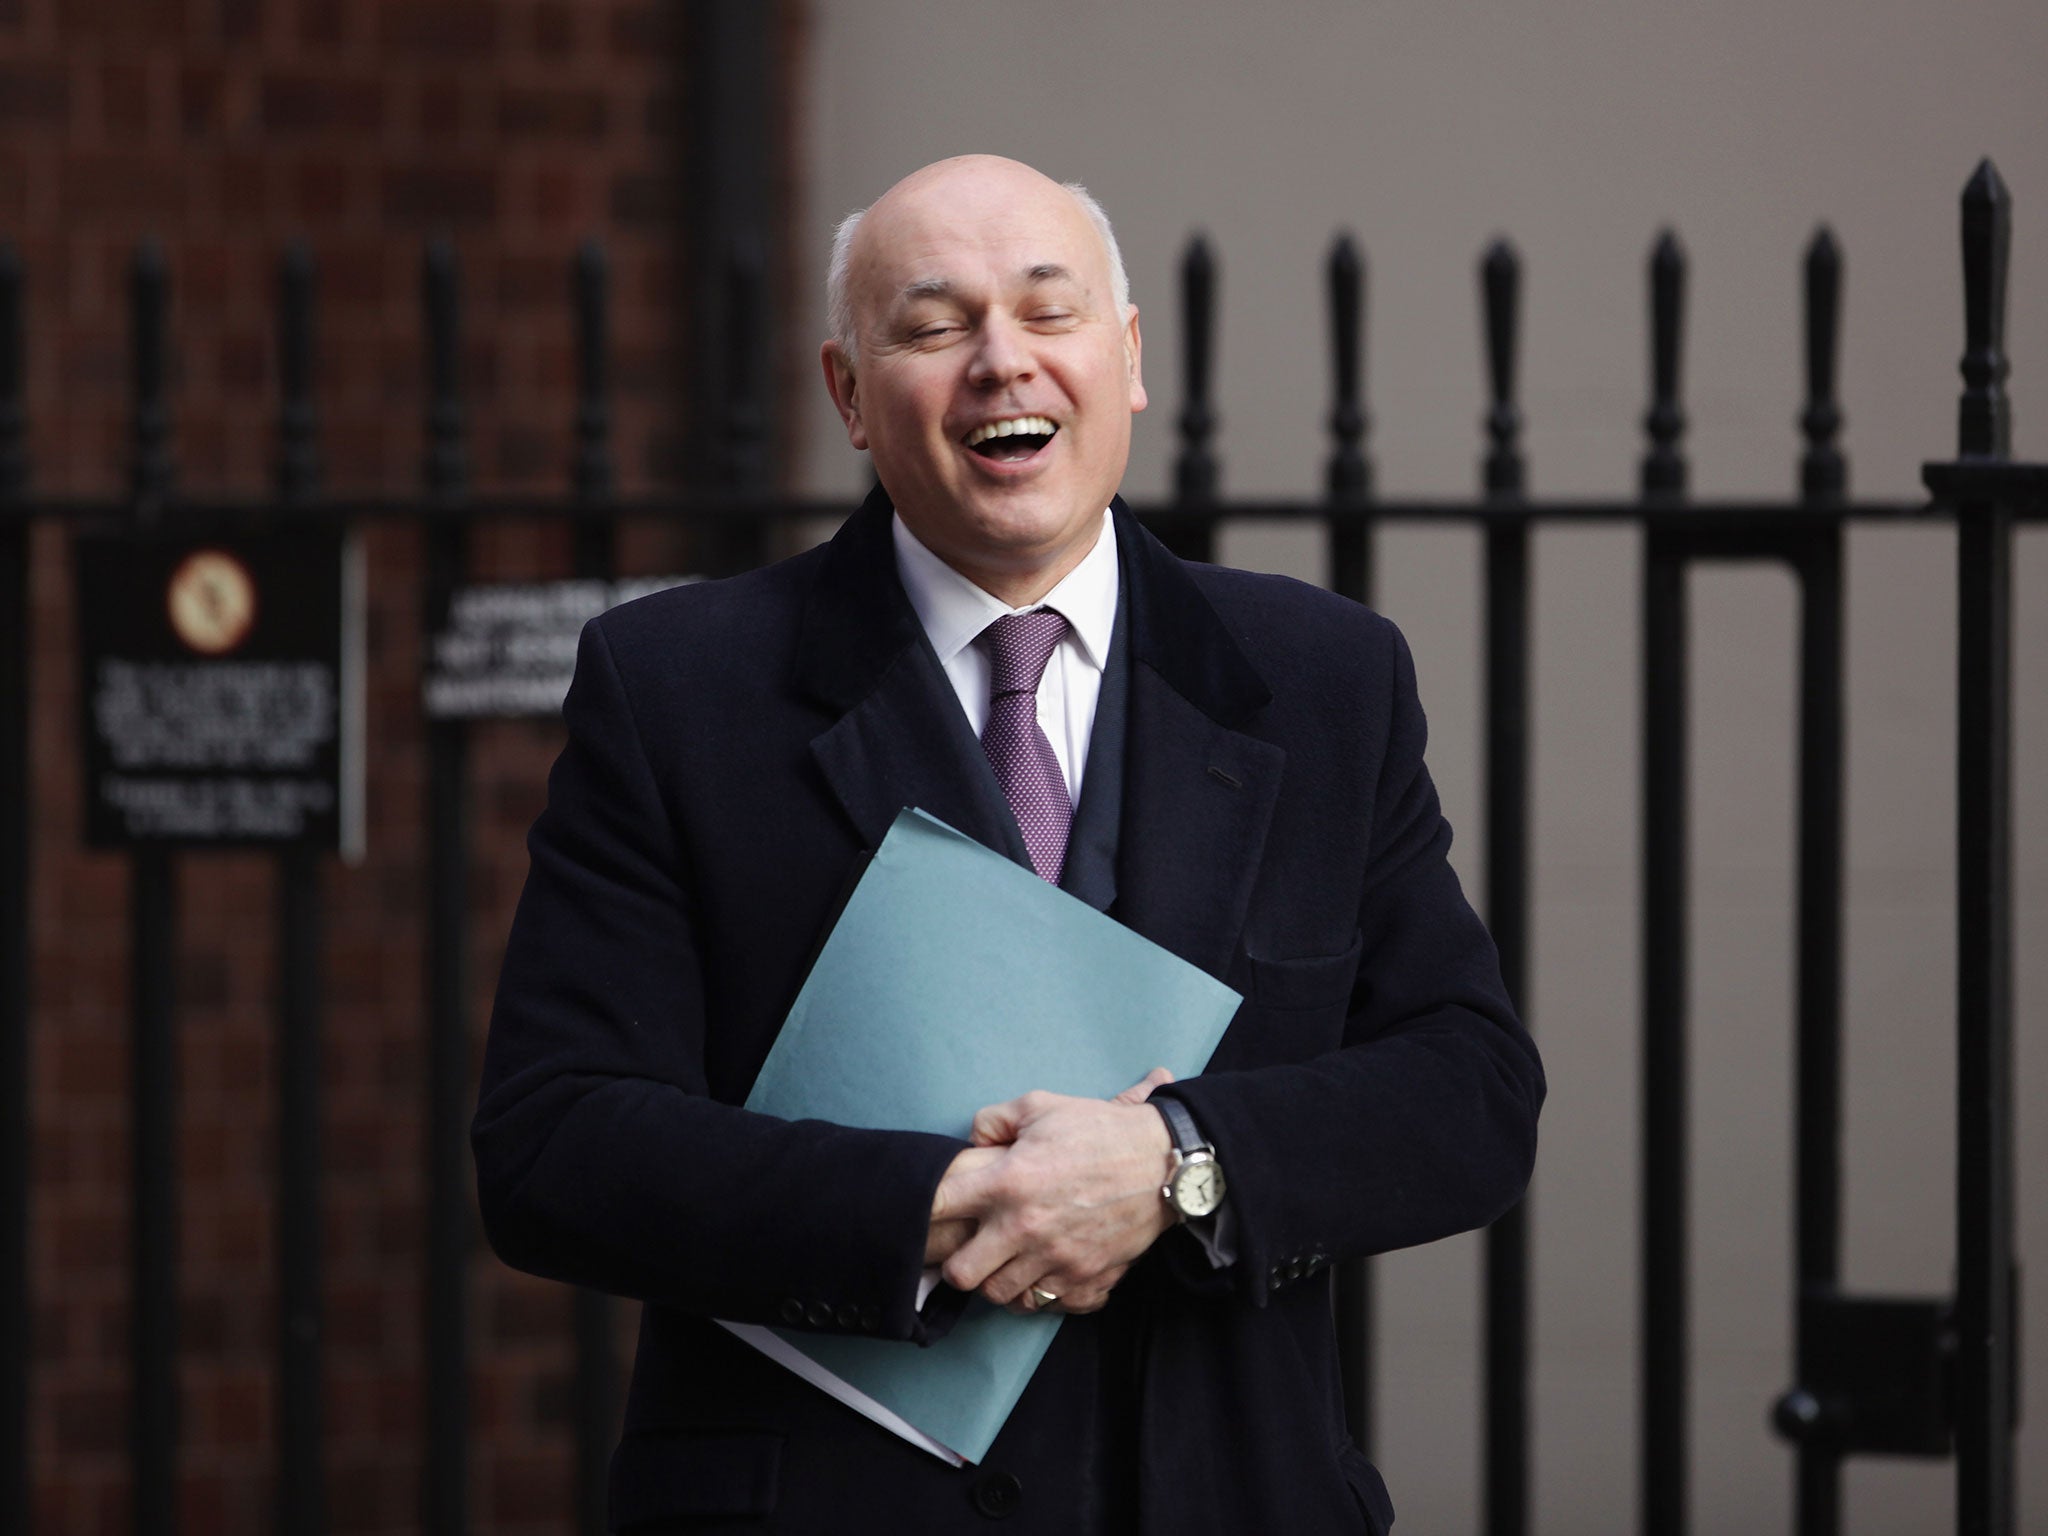 Former DWP secretary Iain Duncan Smith was a proponent of sanctions